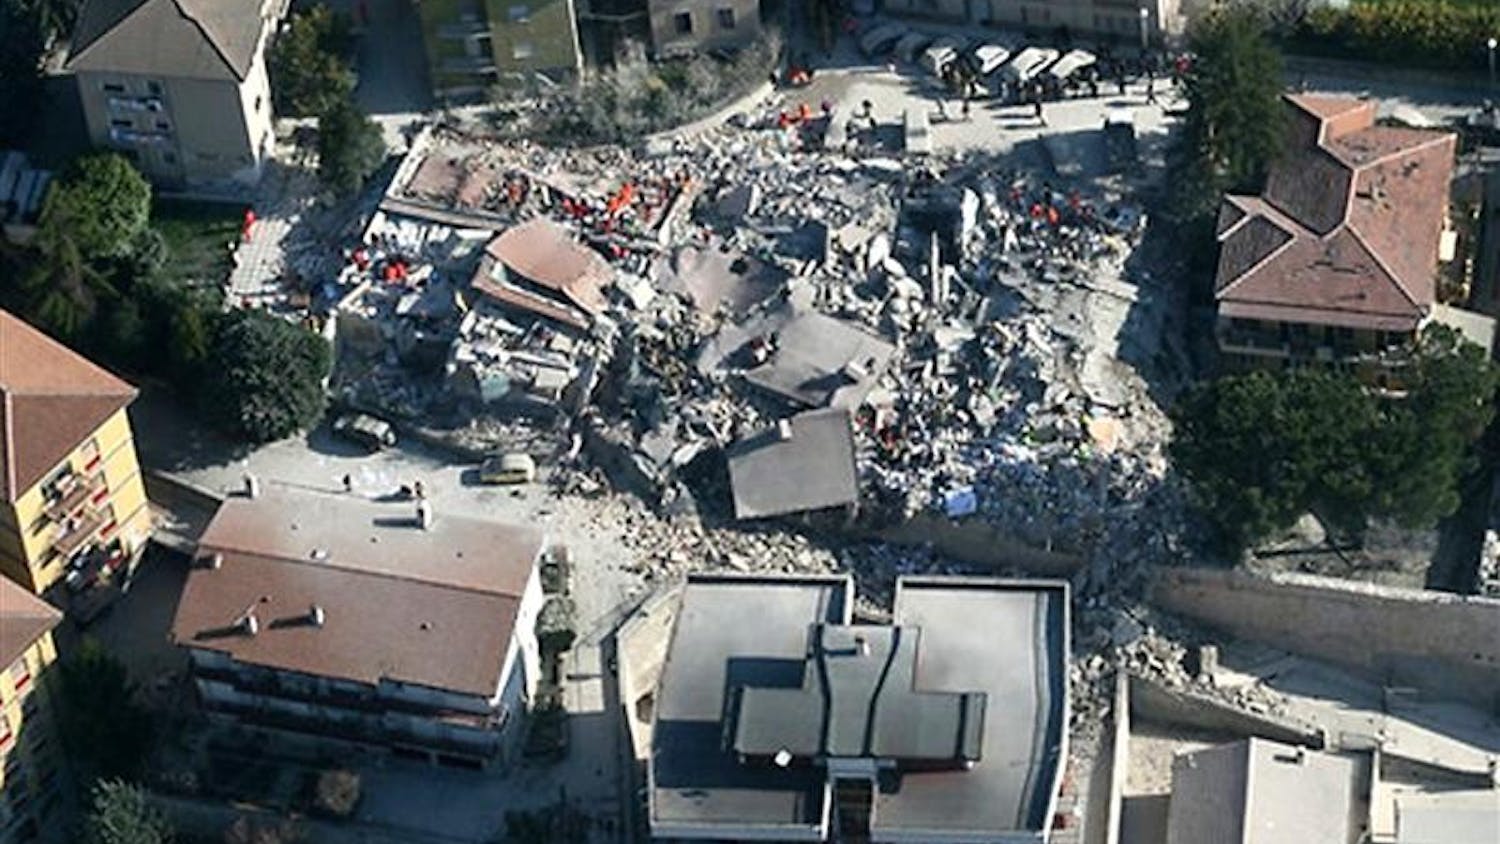 This aerial photo provided by the Italian Police shows the debris of a collapsed building in an area near L'Aquila, central Italy, after a powerful earthquake shook central Italy, early Monday, April 6, 2009. 